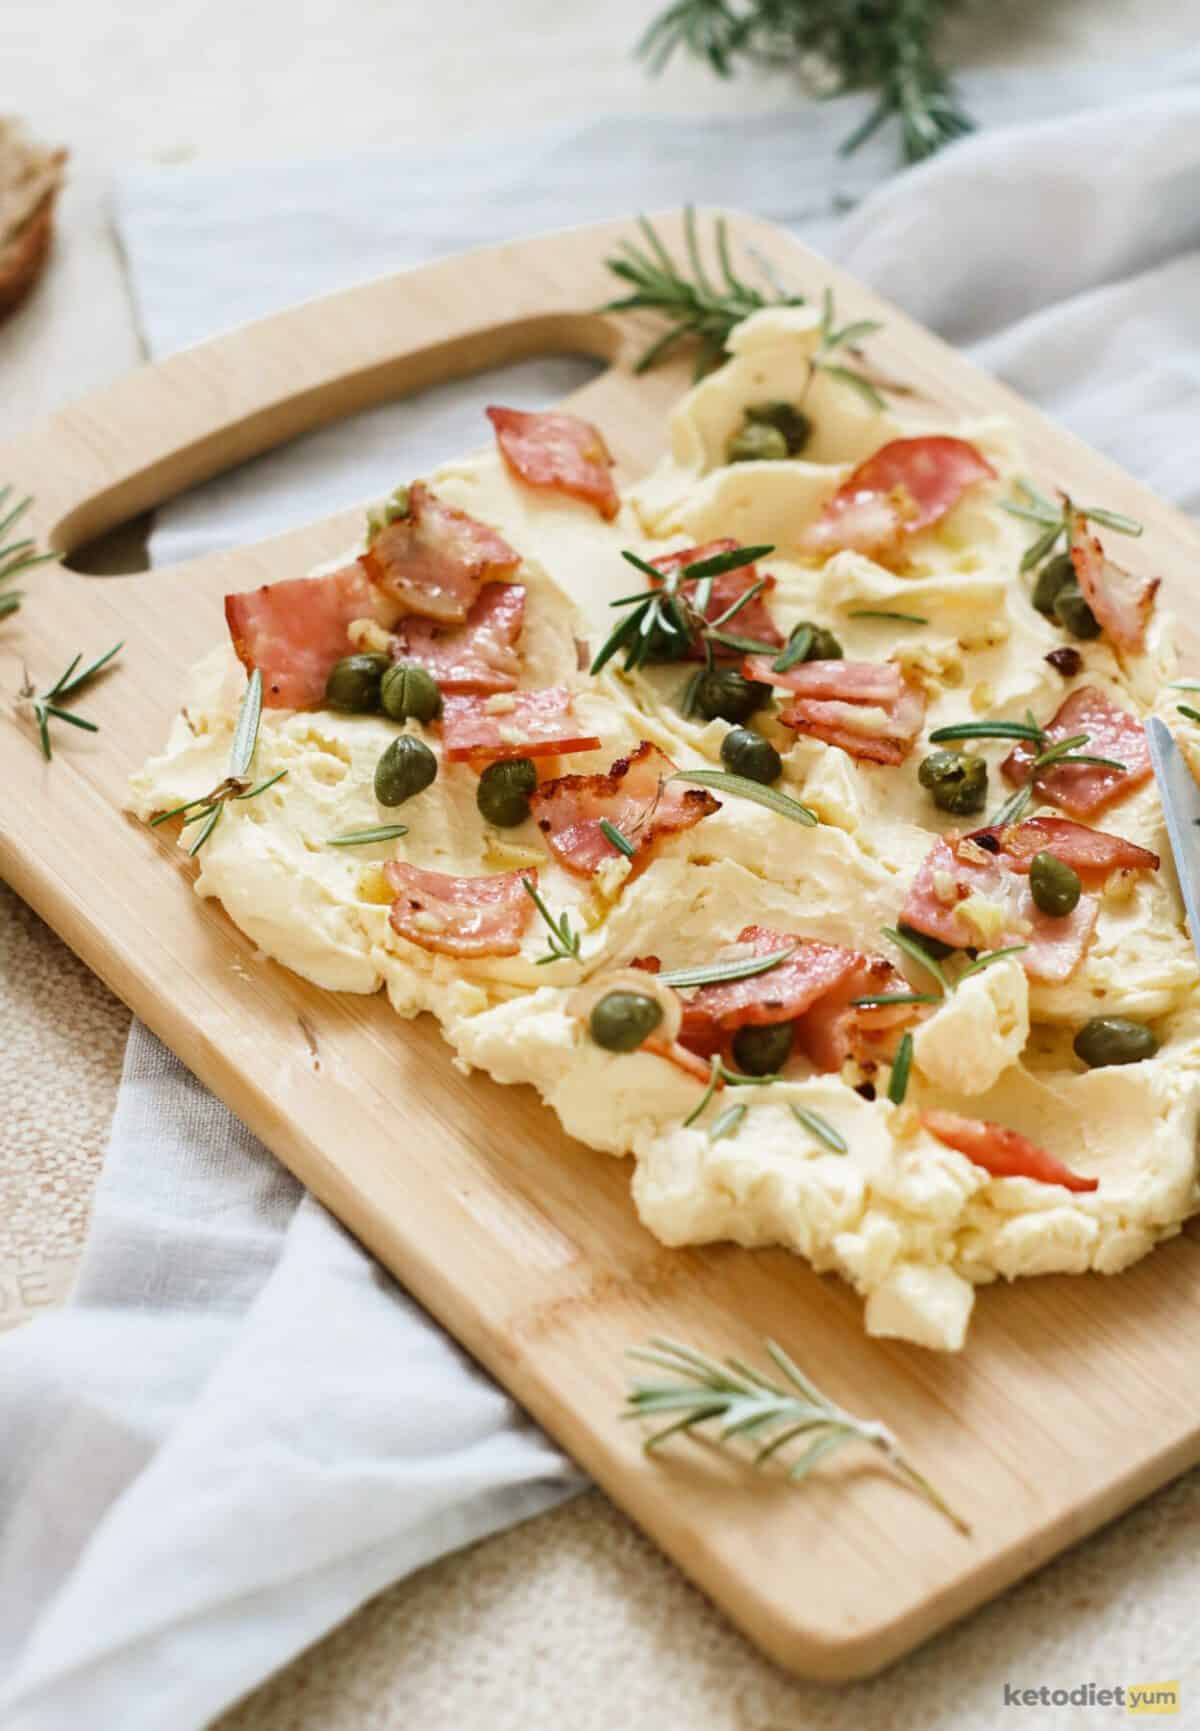 Keto butter board topped with crispy bacon, capers, garlic and rosemary